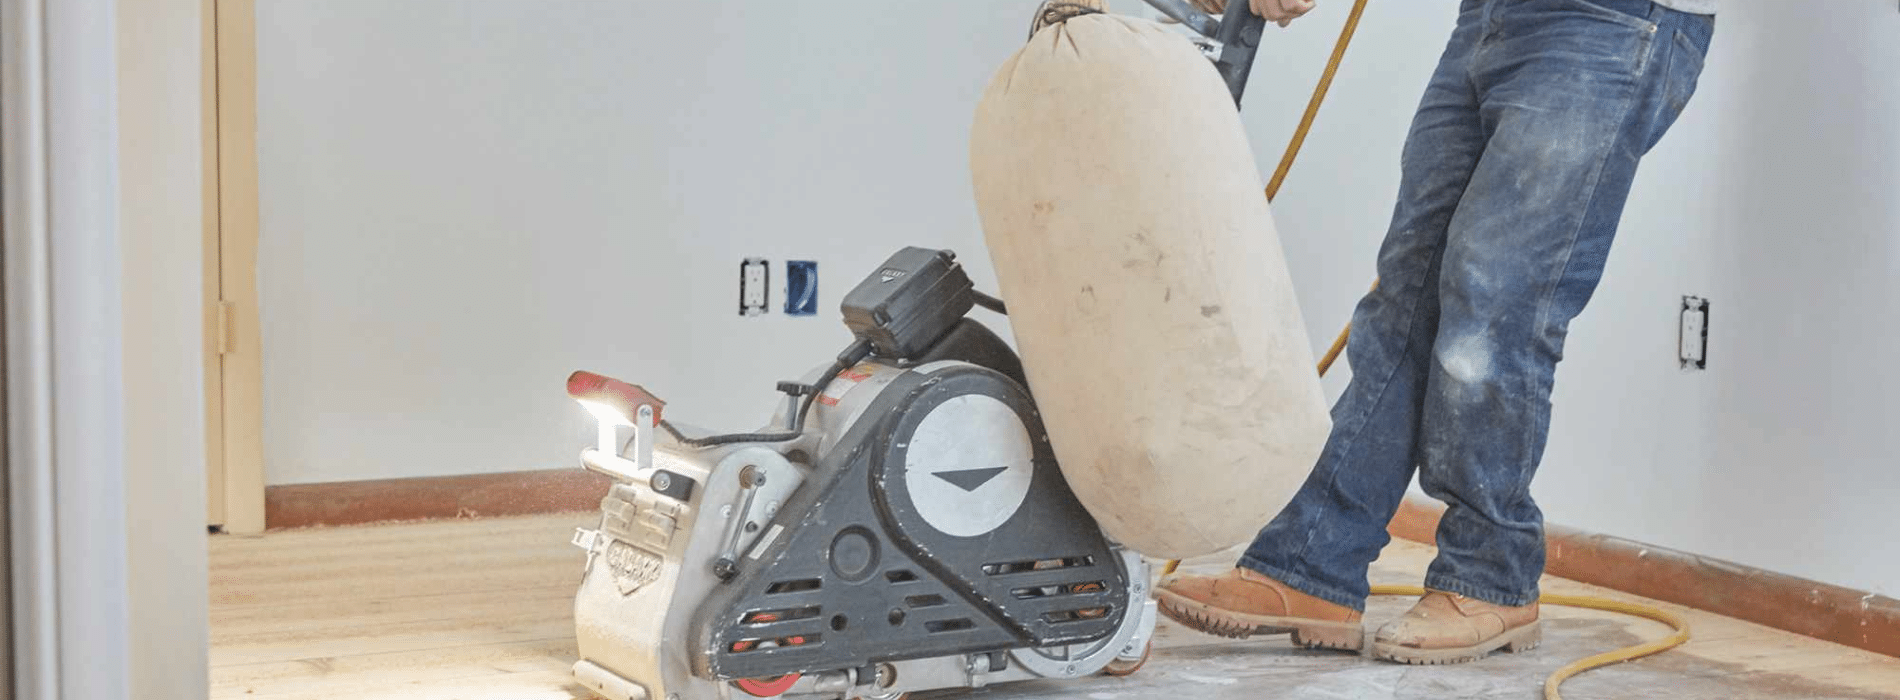 In Old Street, EC2, Mr Sander® use a Bona Scorpion drum sander (200 mm dimension, 1.5 kW power) for sanding parquet floors. It operates at 240 V and 50 Hz. They connect it to a dust extraction system with a HEPA filter to ensure a clean and efficient sanding process. 